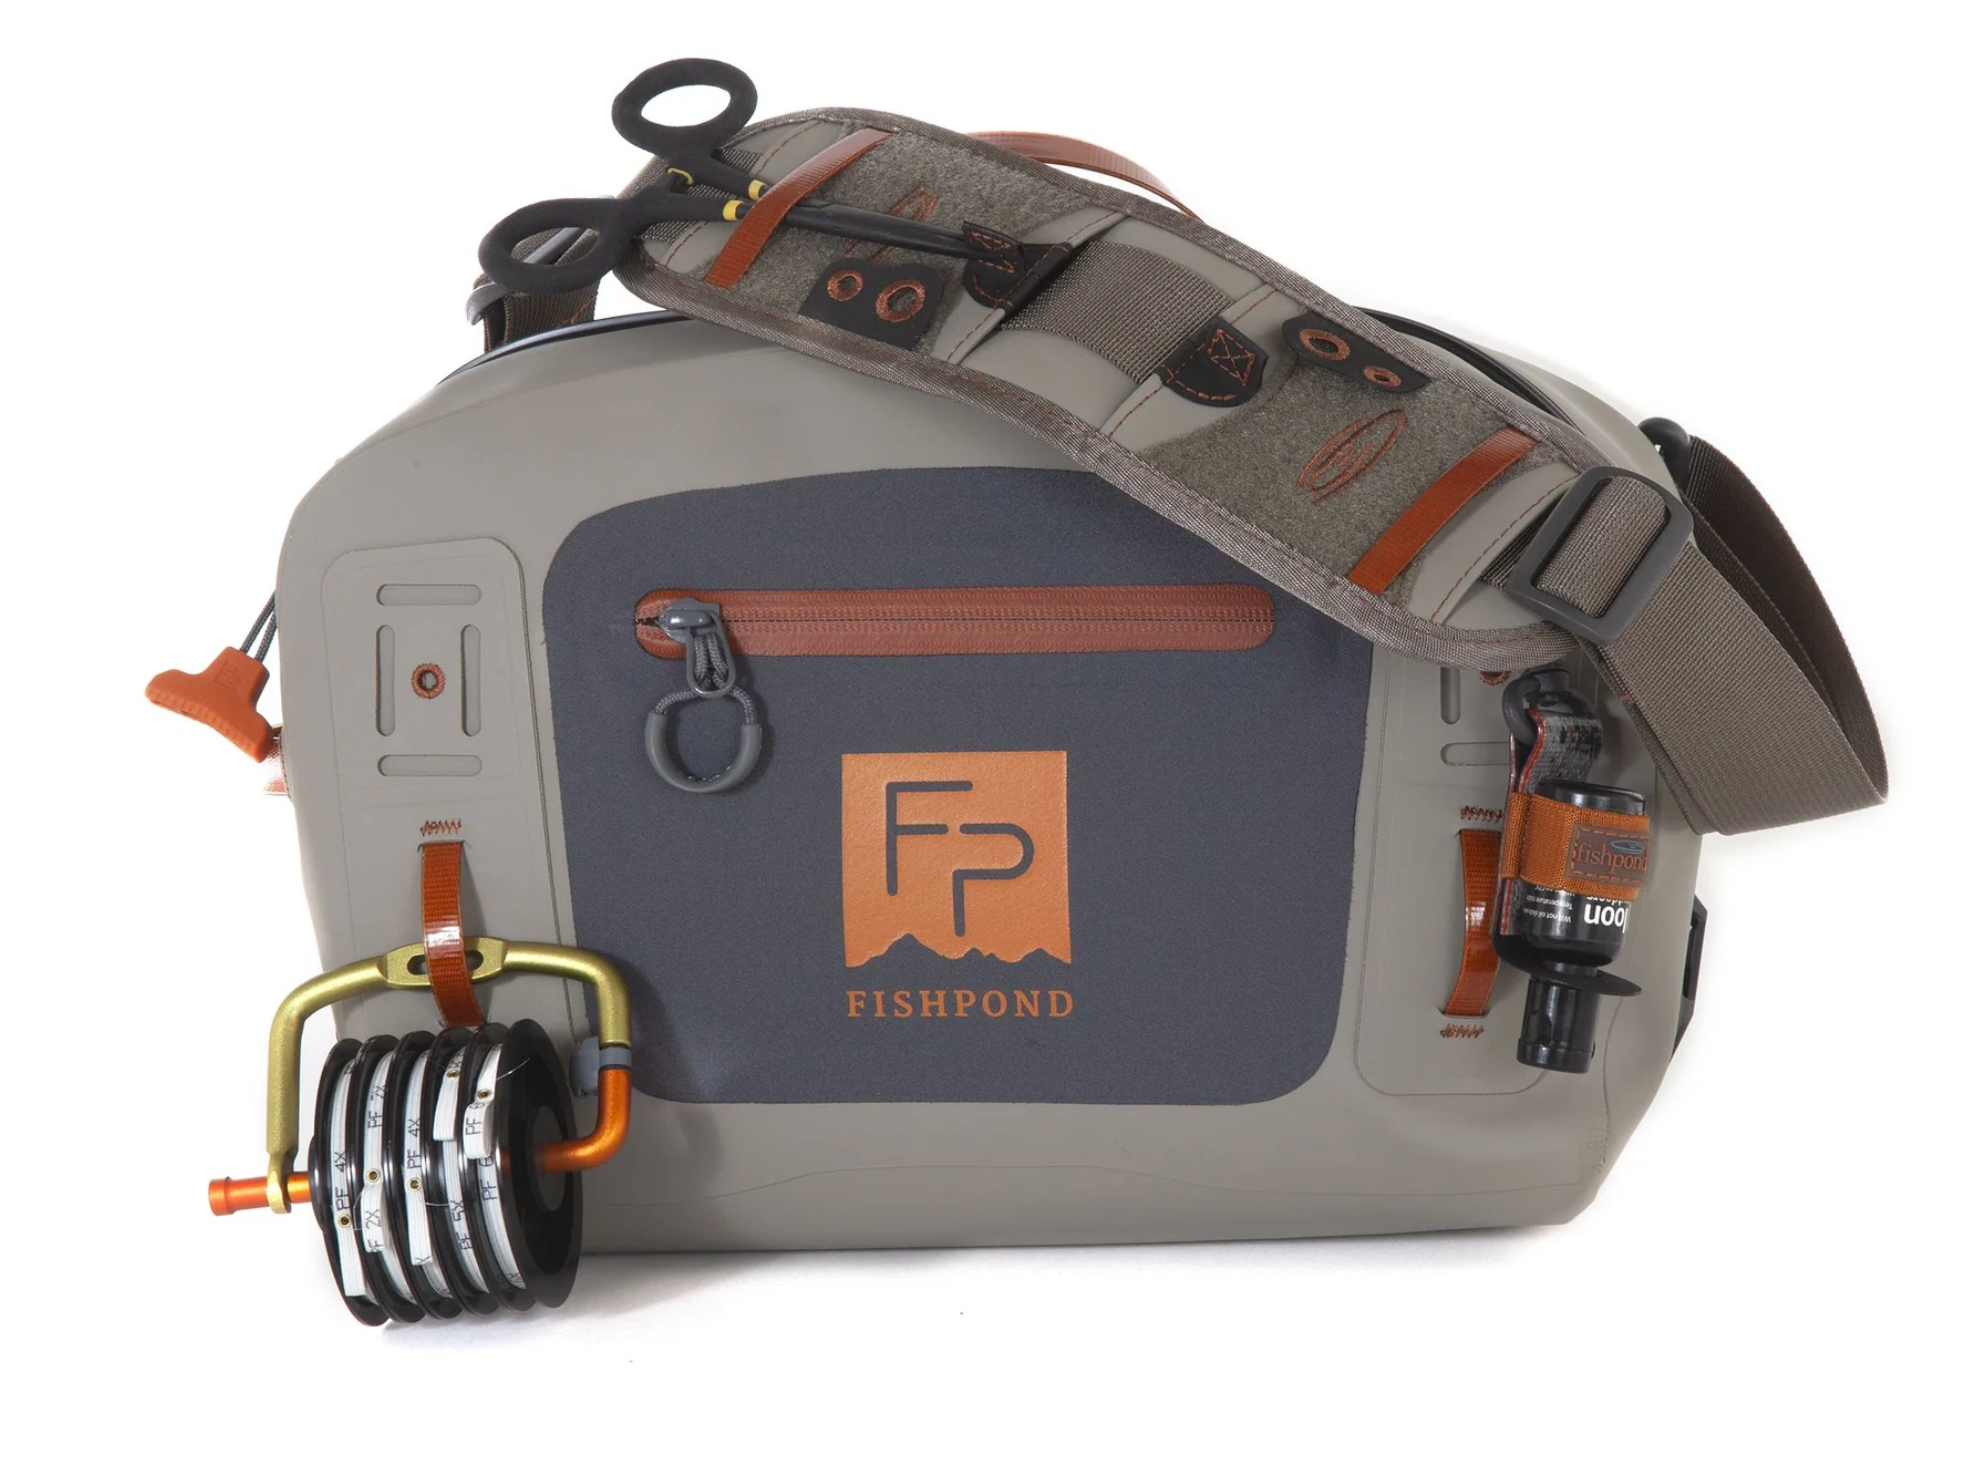 Fishpond Thunderhead Submersible Lumbar Pack -  - Mansfield Hunting & Fishing - Products to prepare for Corona Virus